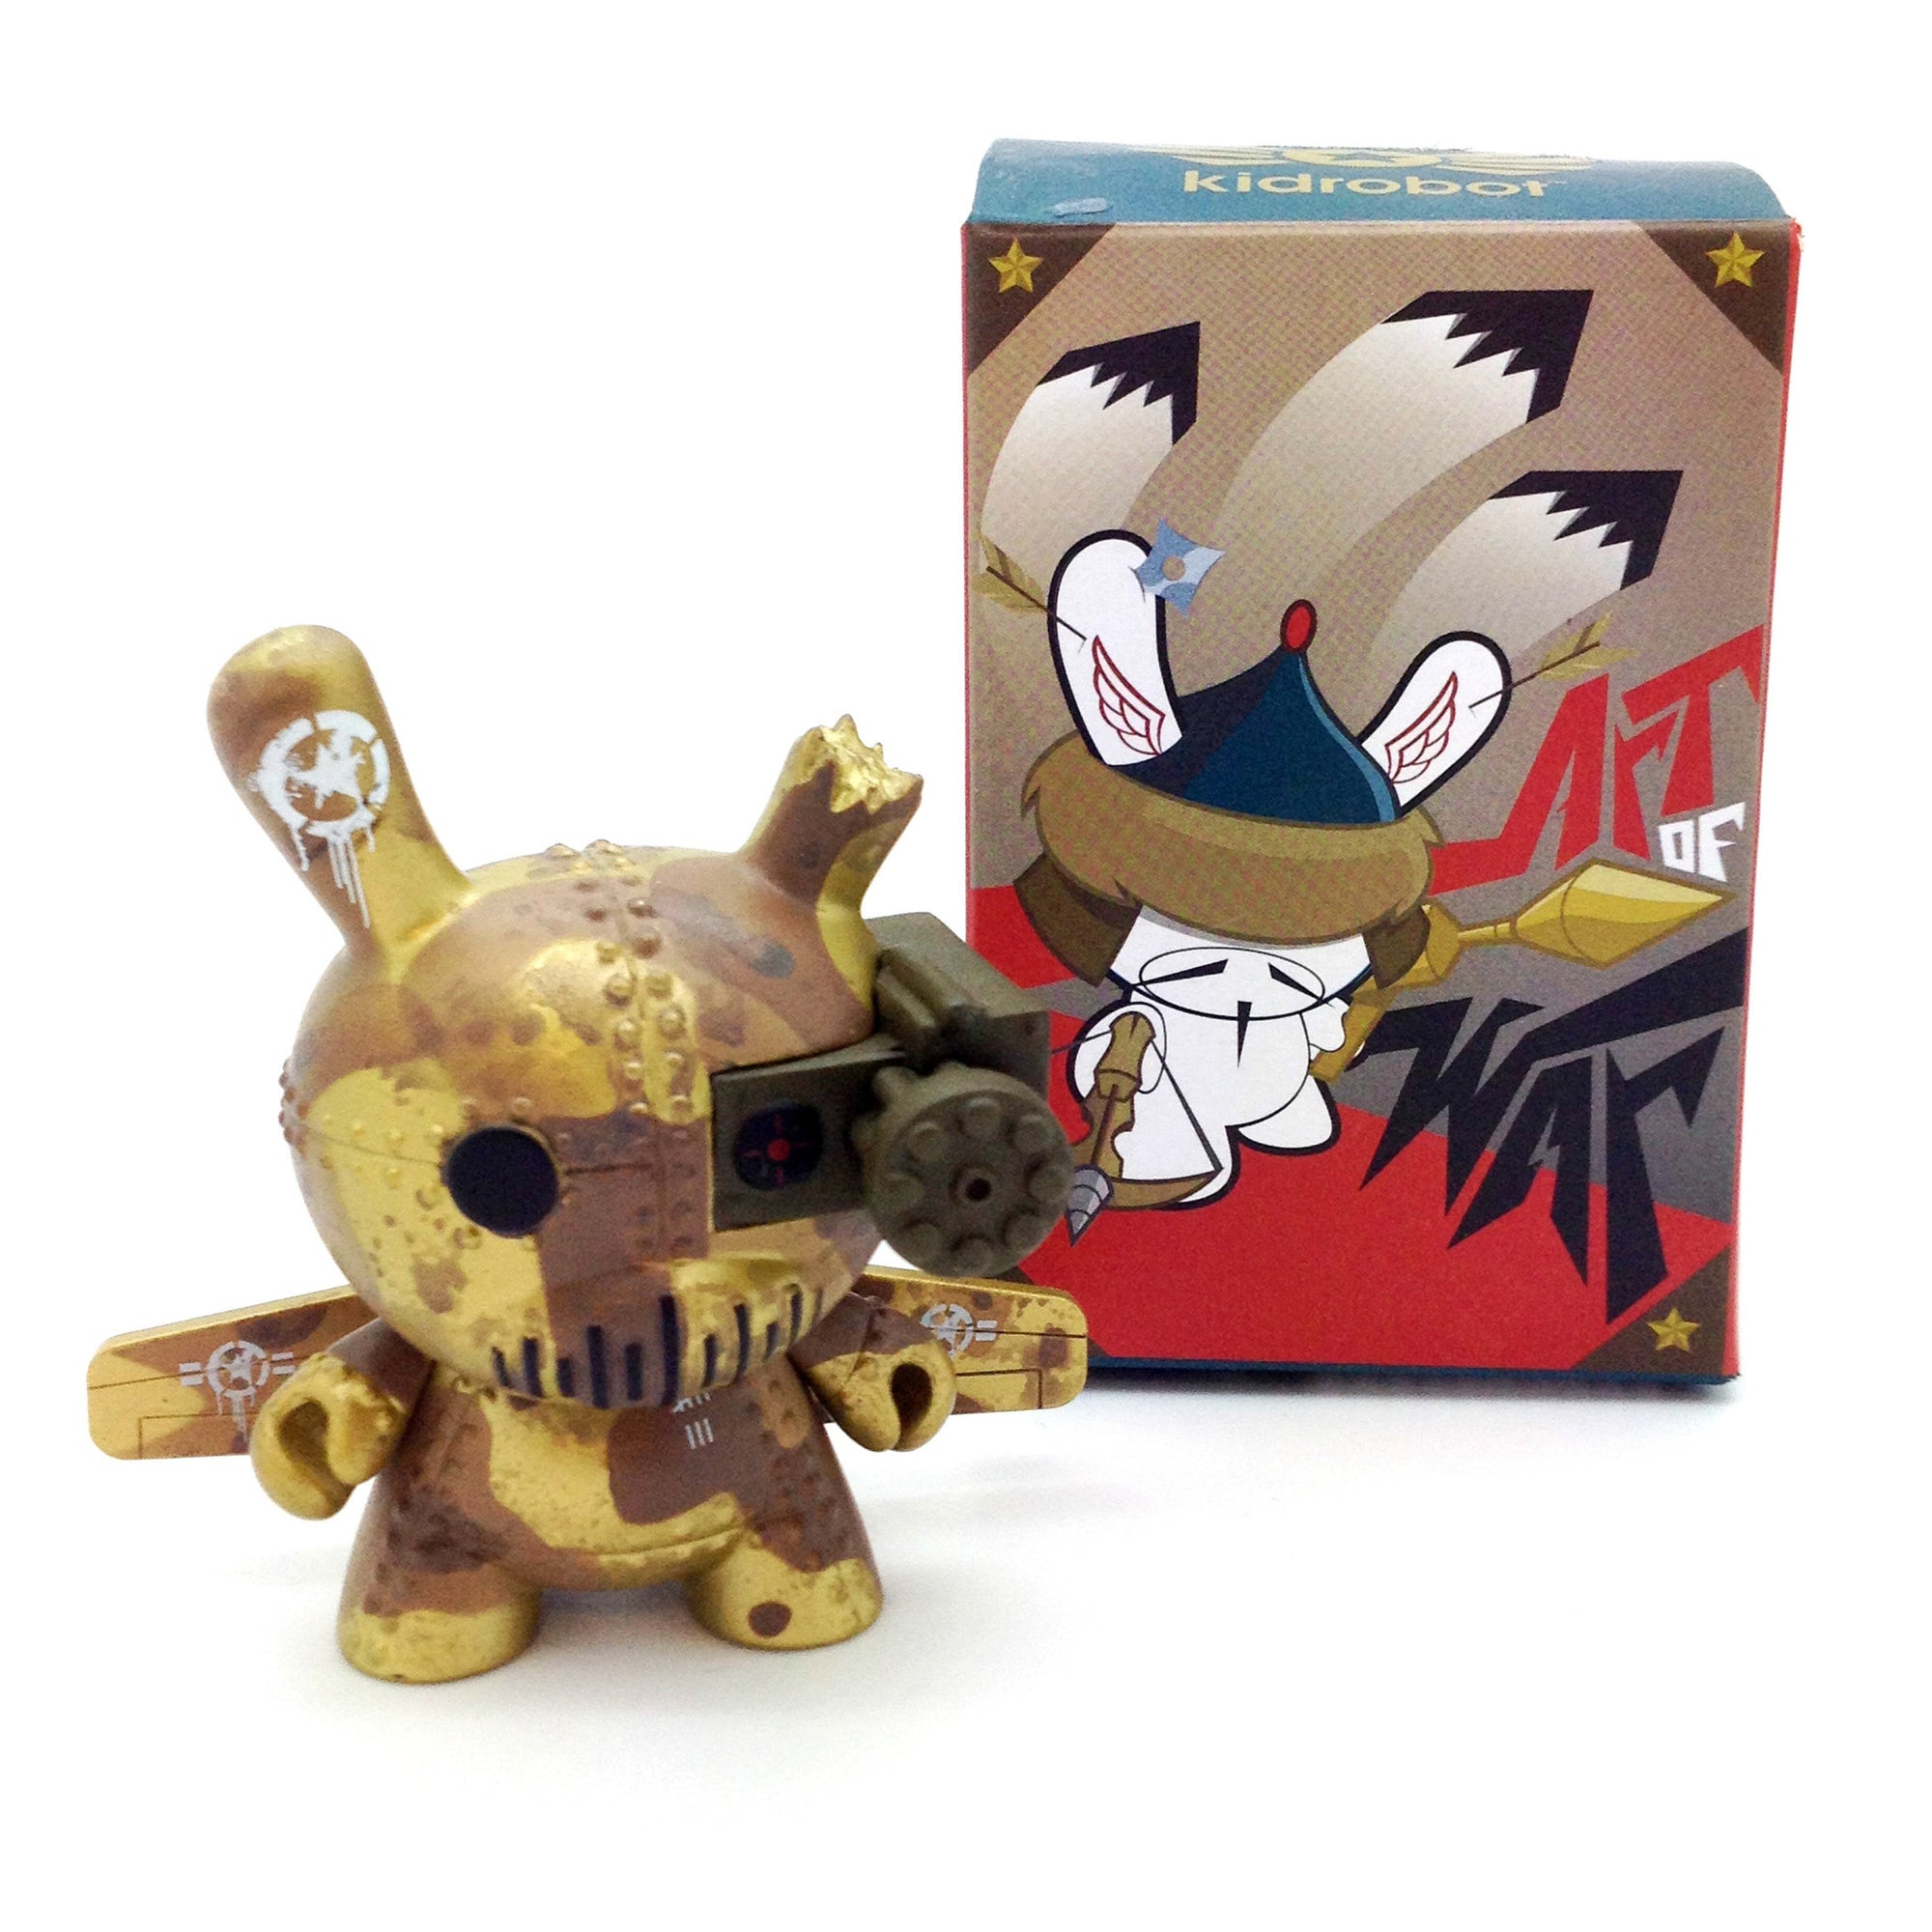 Art of War Dunny Series - Tank Destroyer by DrilOne (Case Exclusive) - Mindzai
 - 1